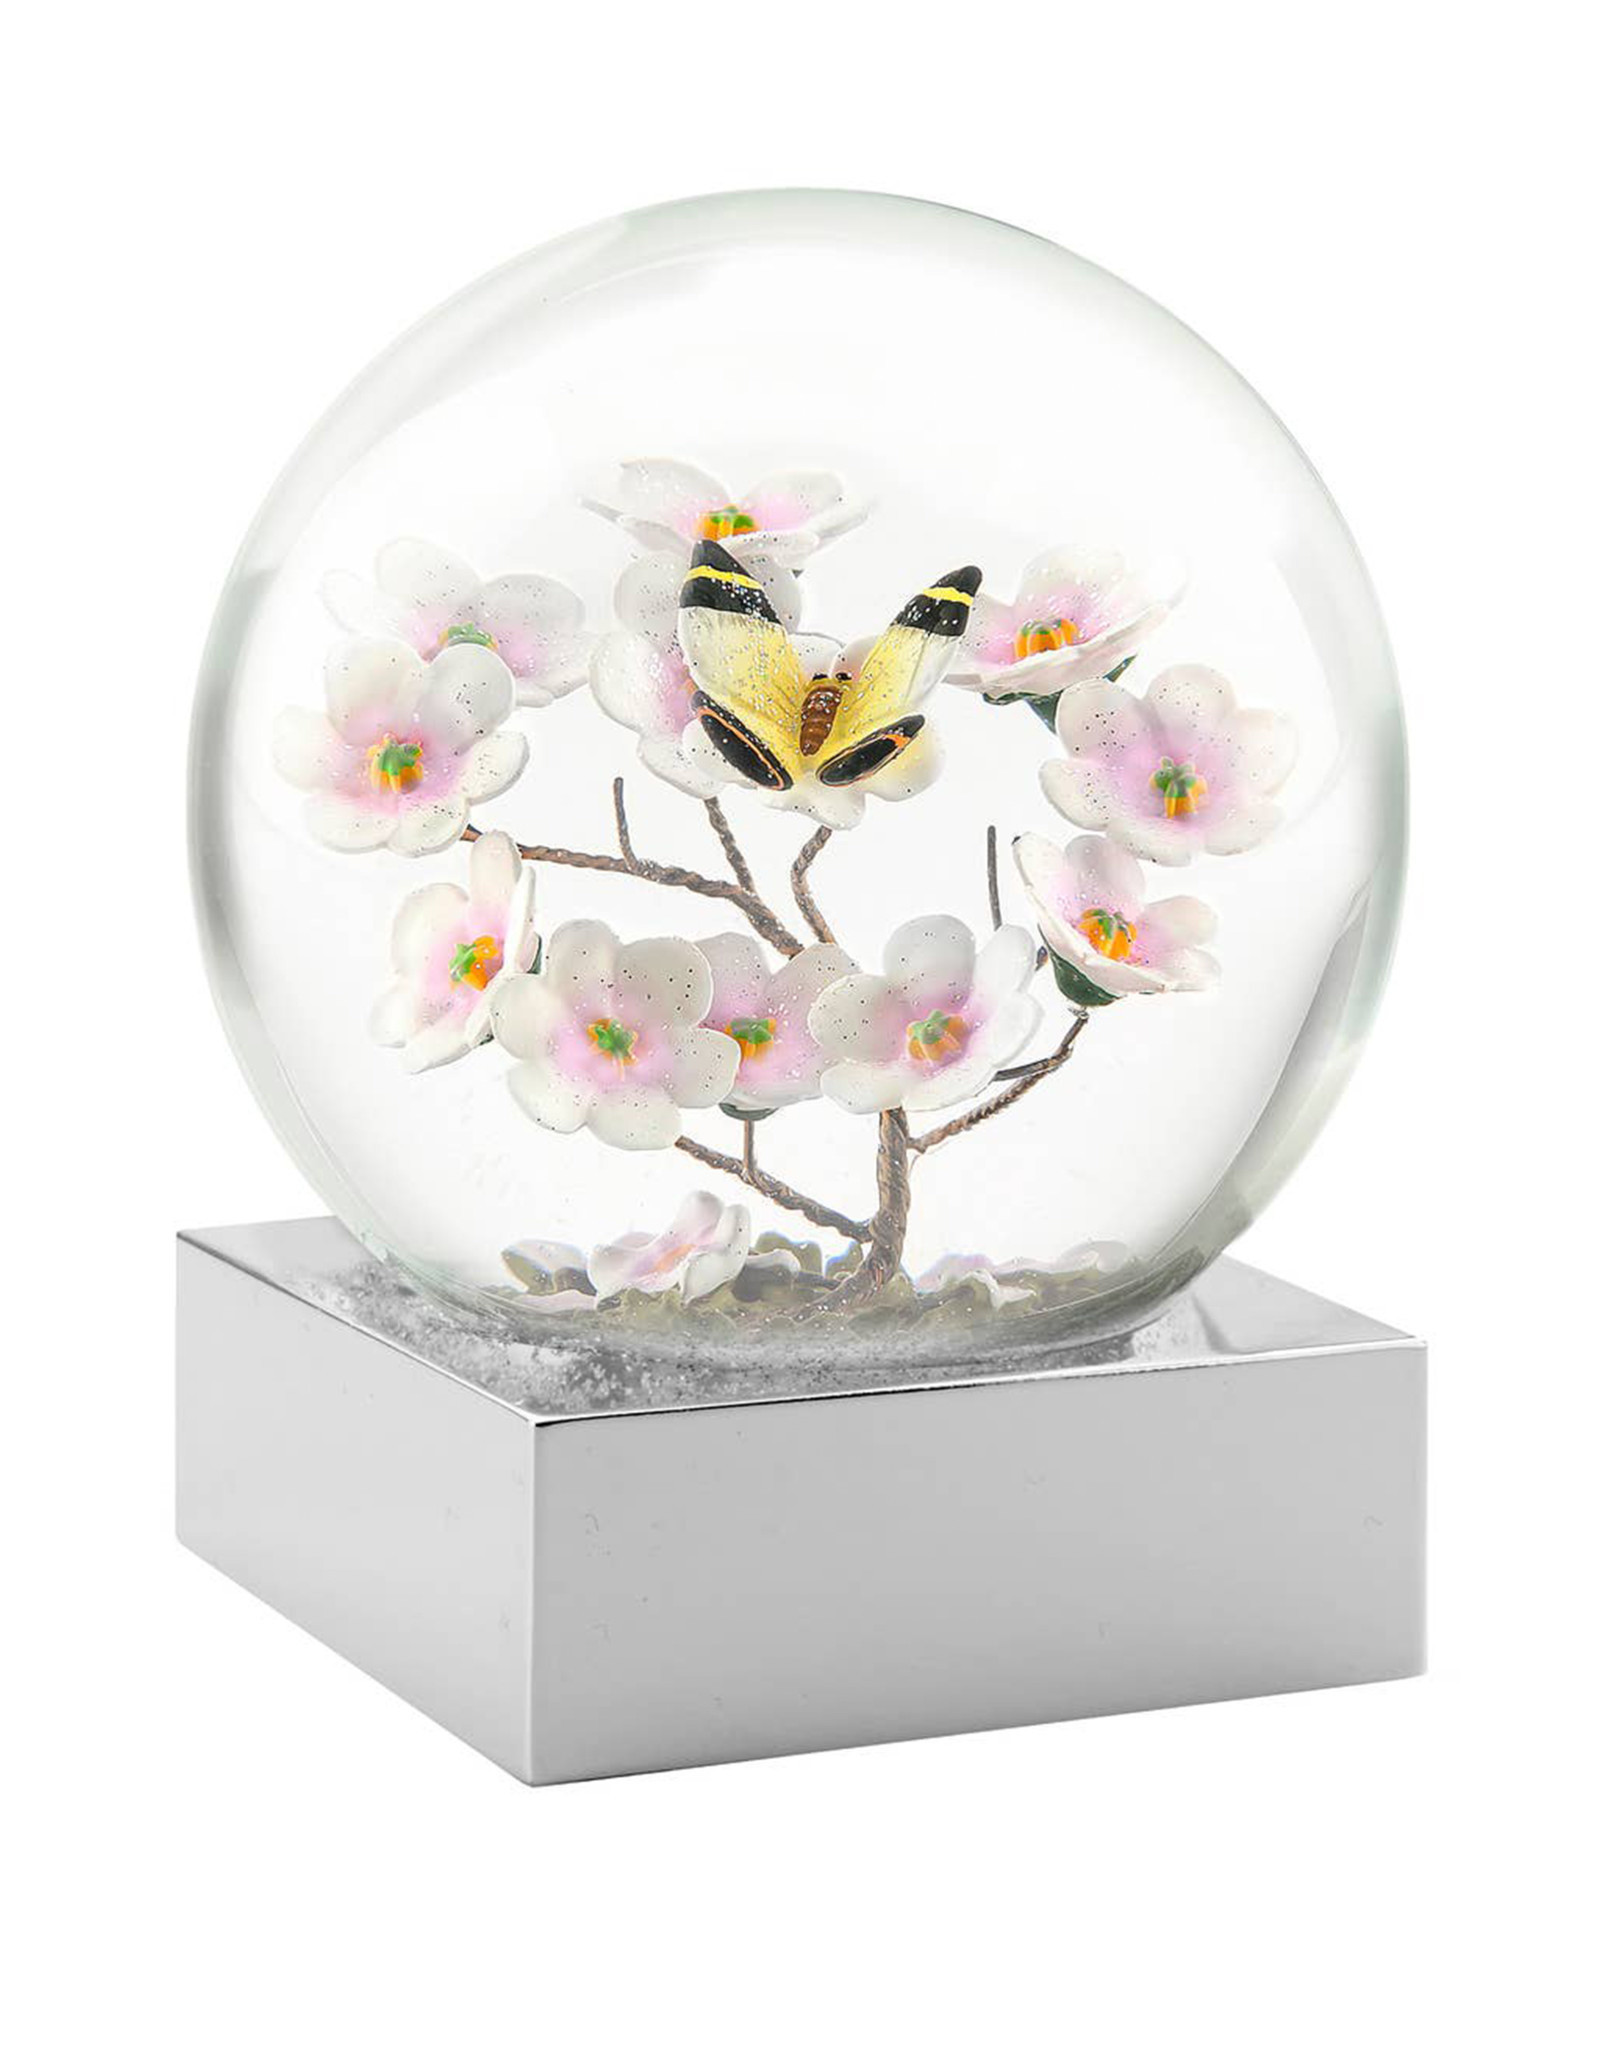 COOL SNOW GLOBES BUTTERFLY ON BRANCH SNOW GLOBE